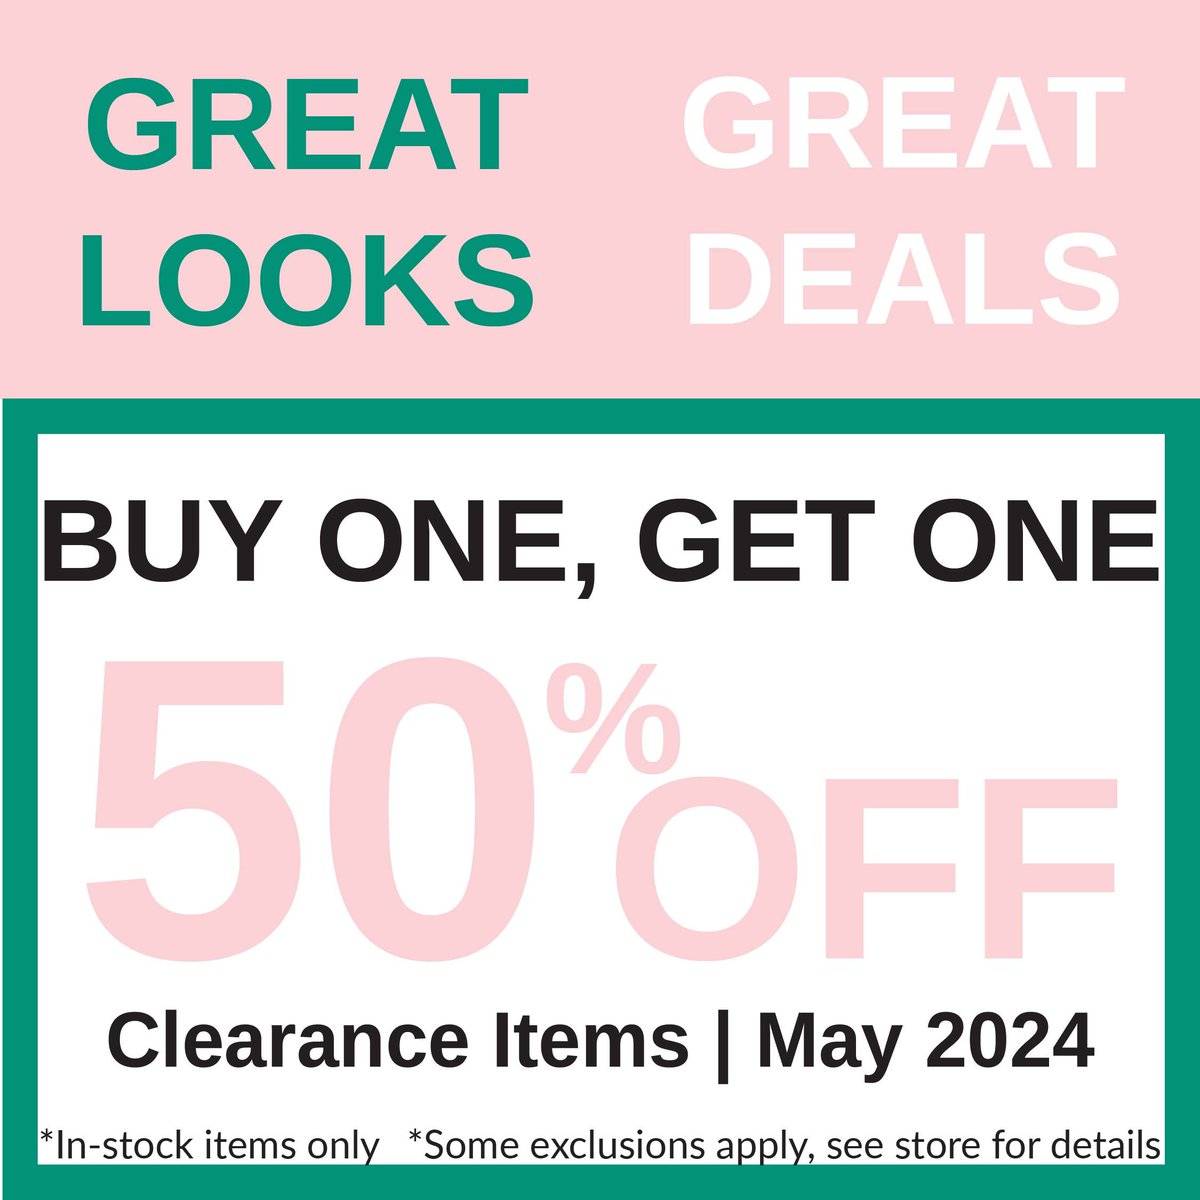 Buy One, Get One 50% OFF on Clearance Items during May 2024 ! * See store for details buff.ly/2Wy9jOv #mirenasfashions #dancewear #dancers #skaters #gymnasts #ontario #mississauga